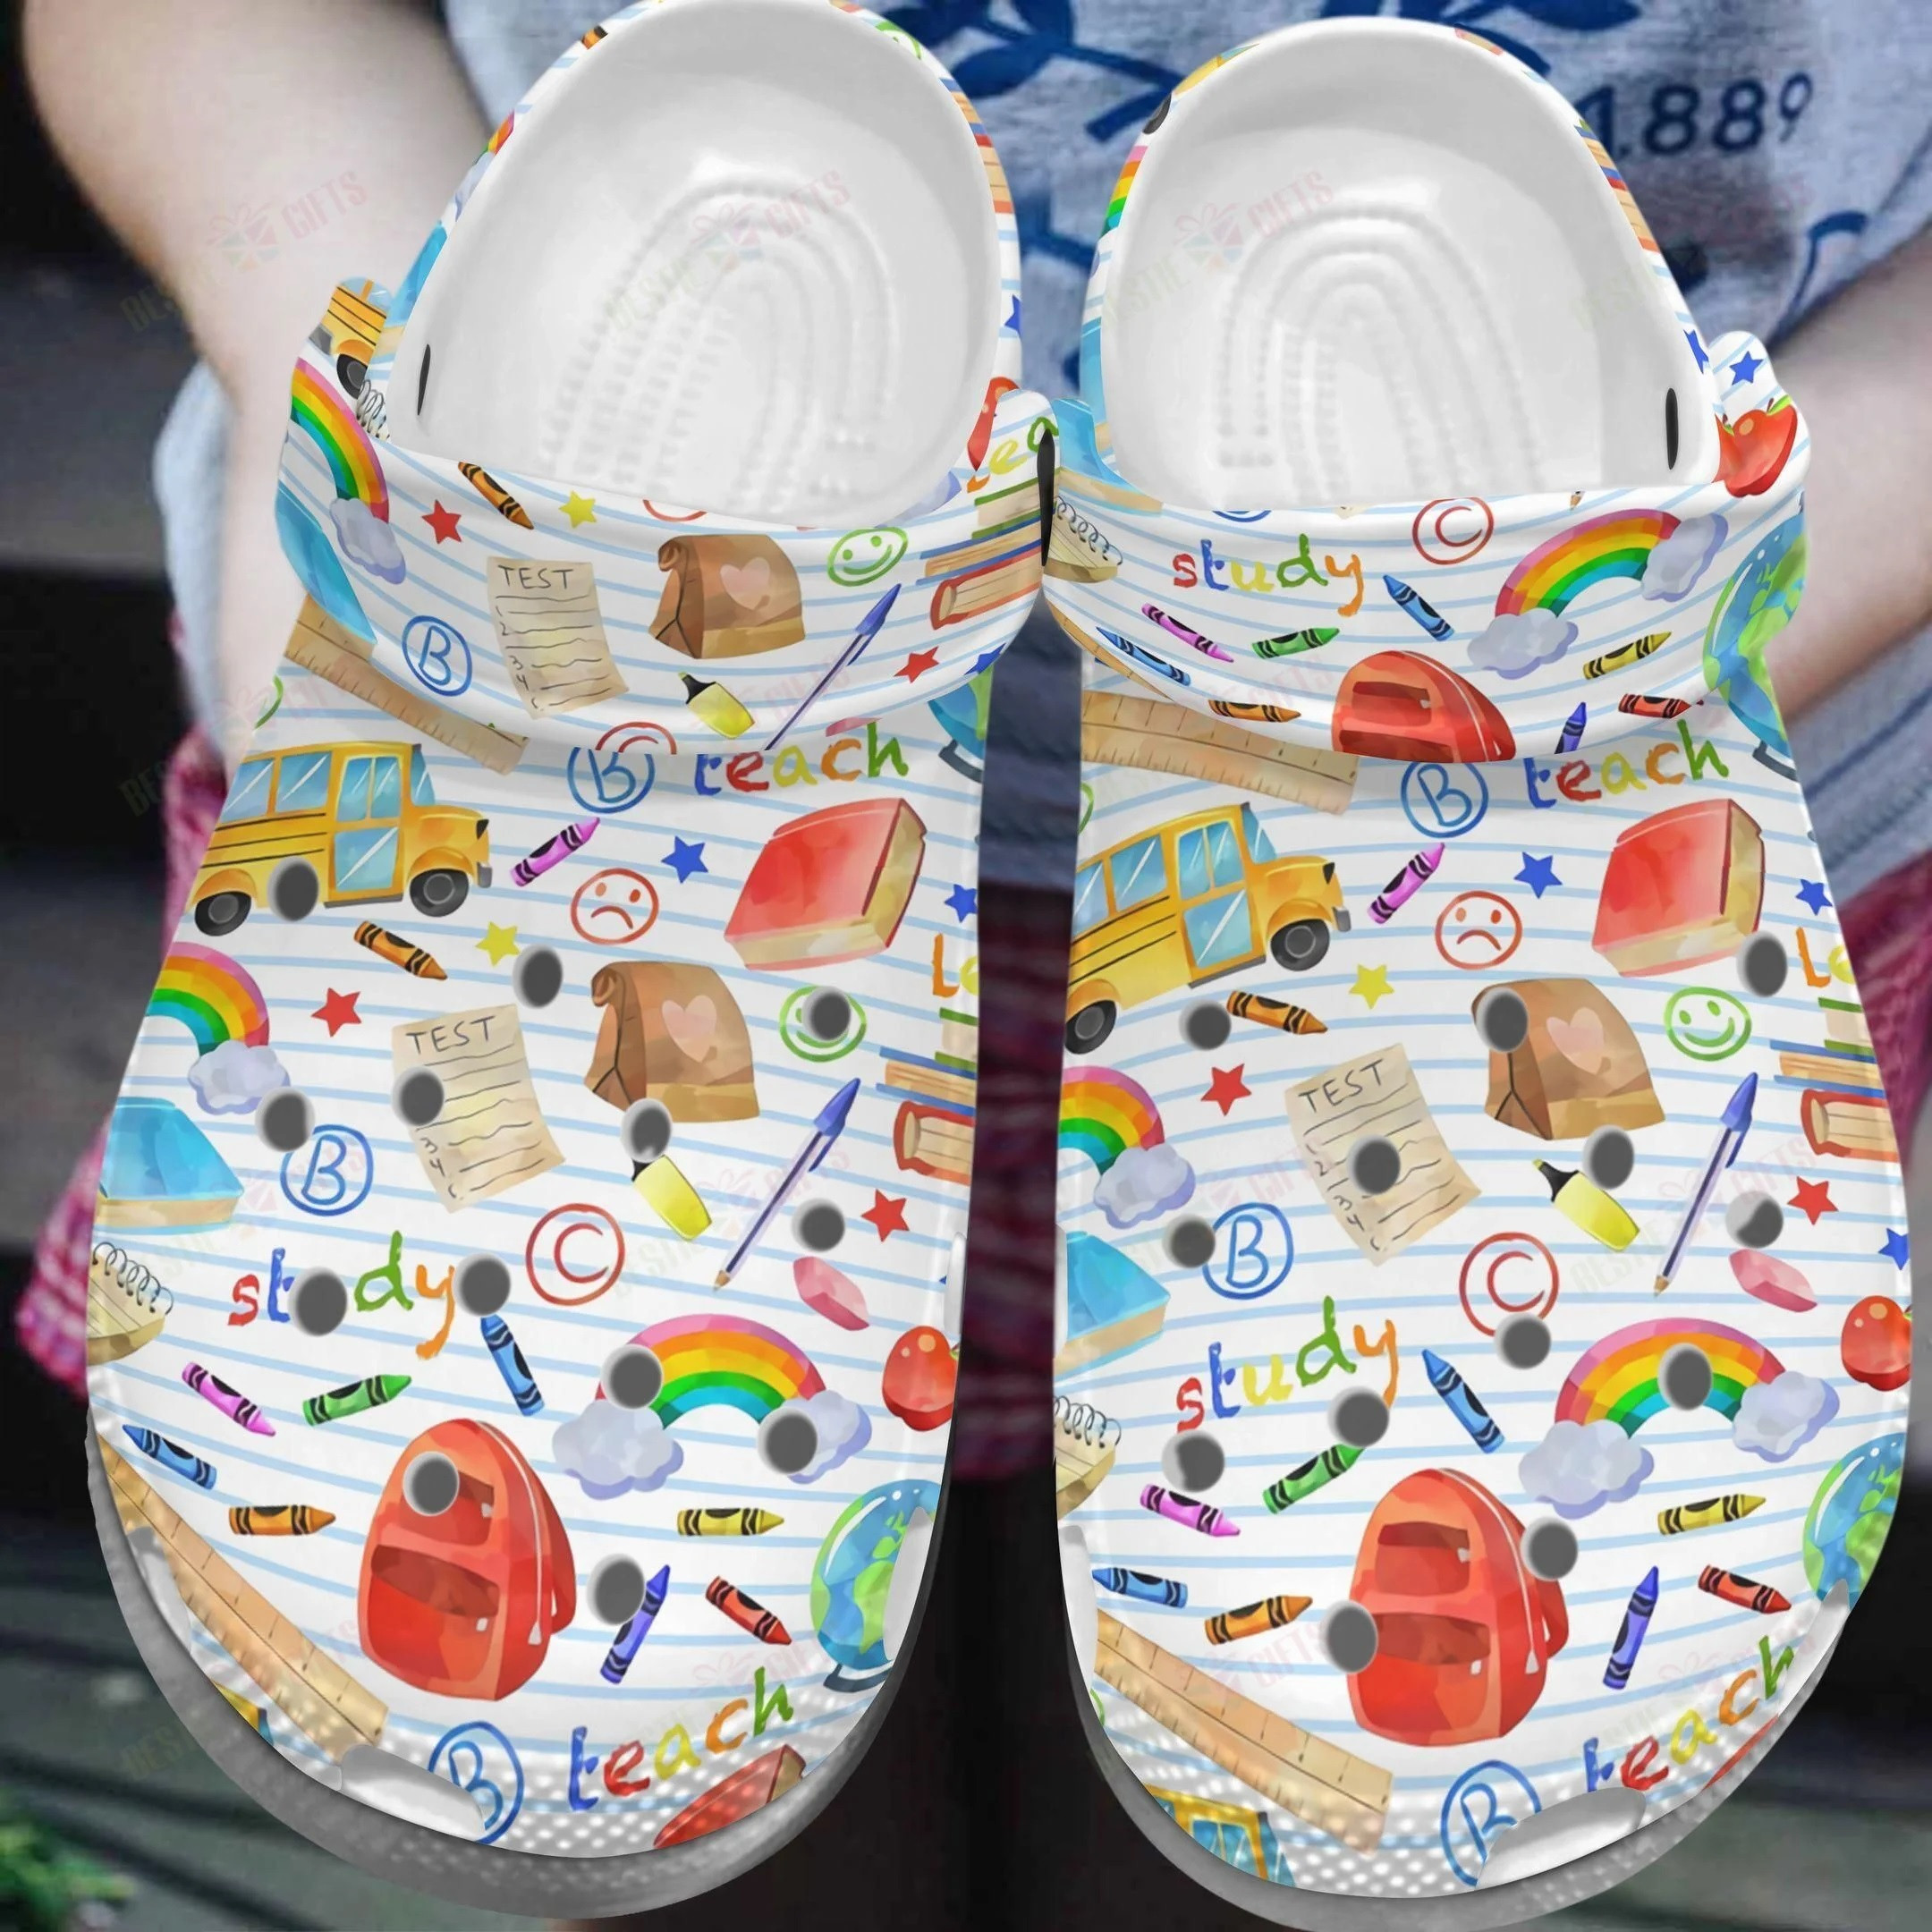 Notebook Paper School Learning Tools Crocs Crocband Clog Shoes For Men Women